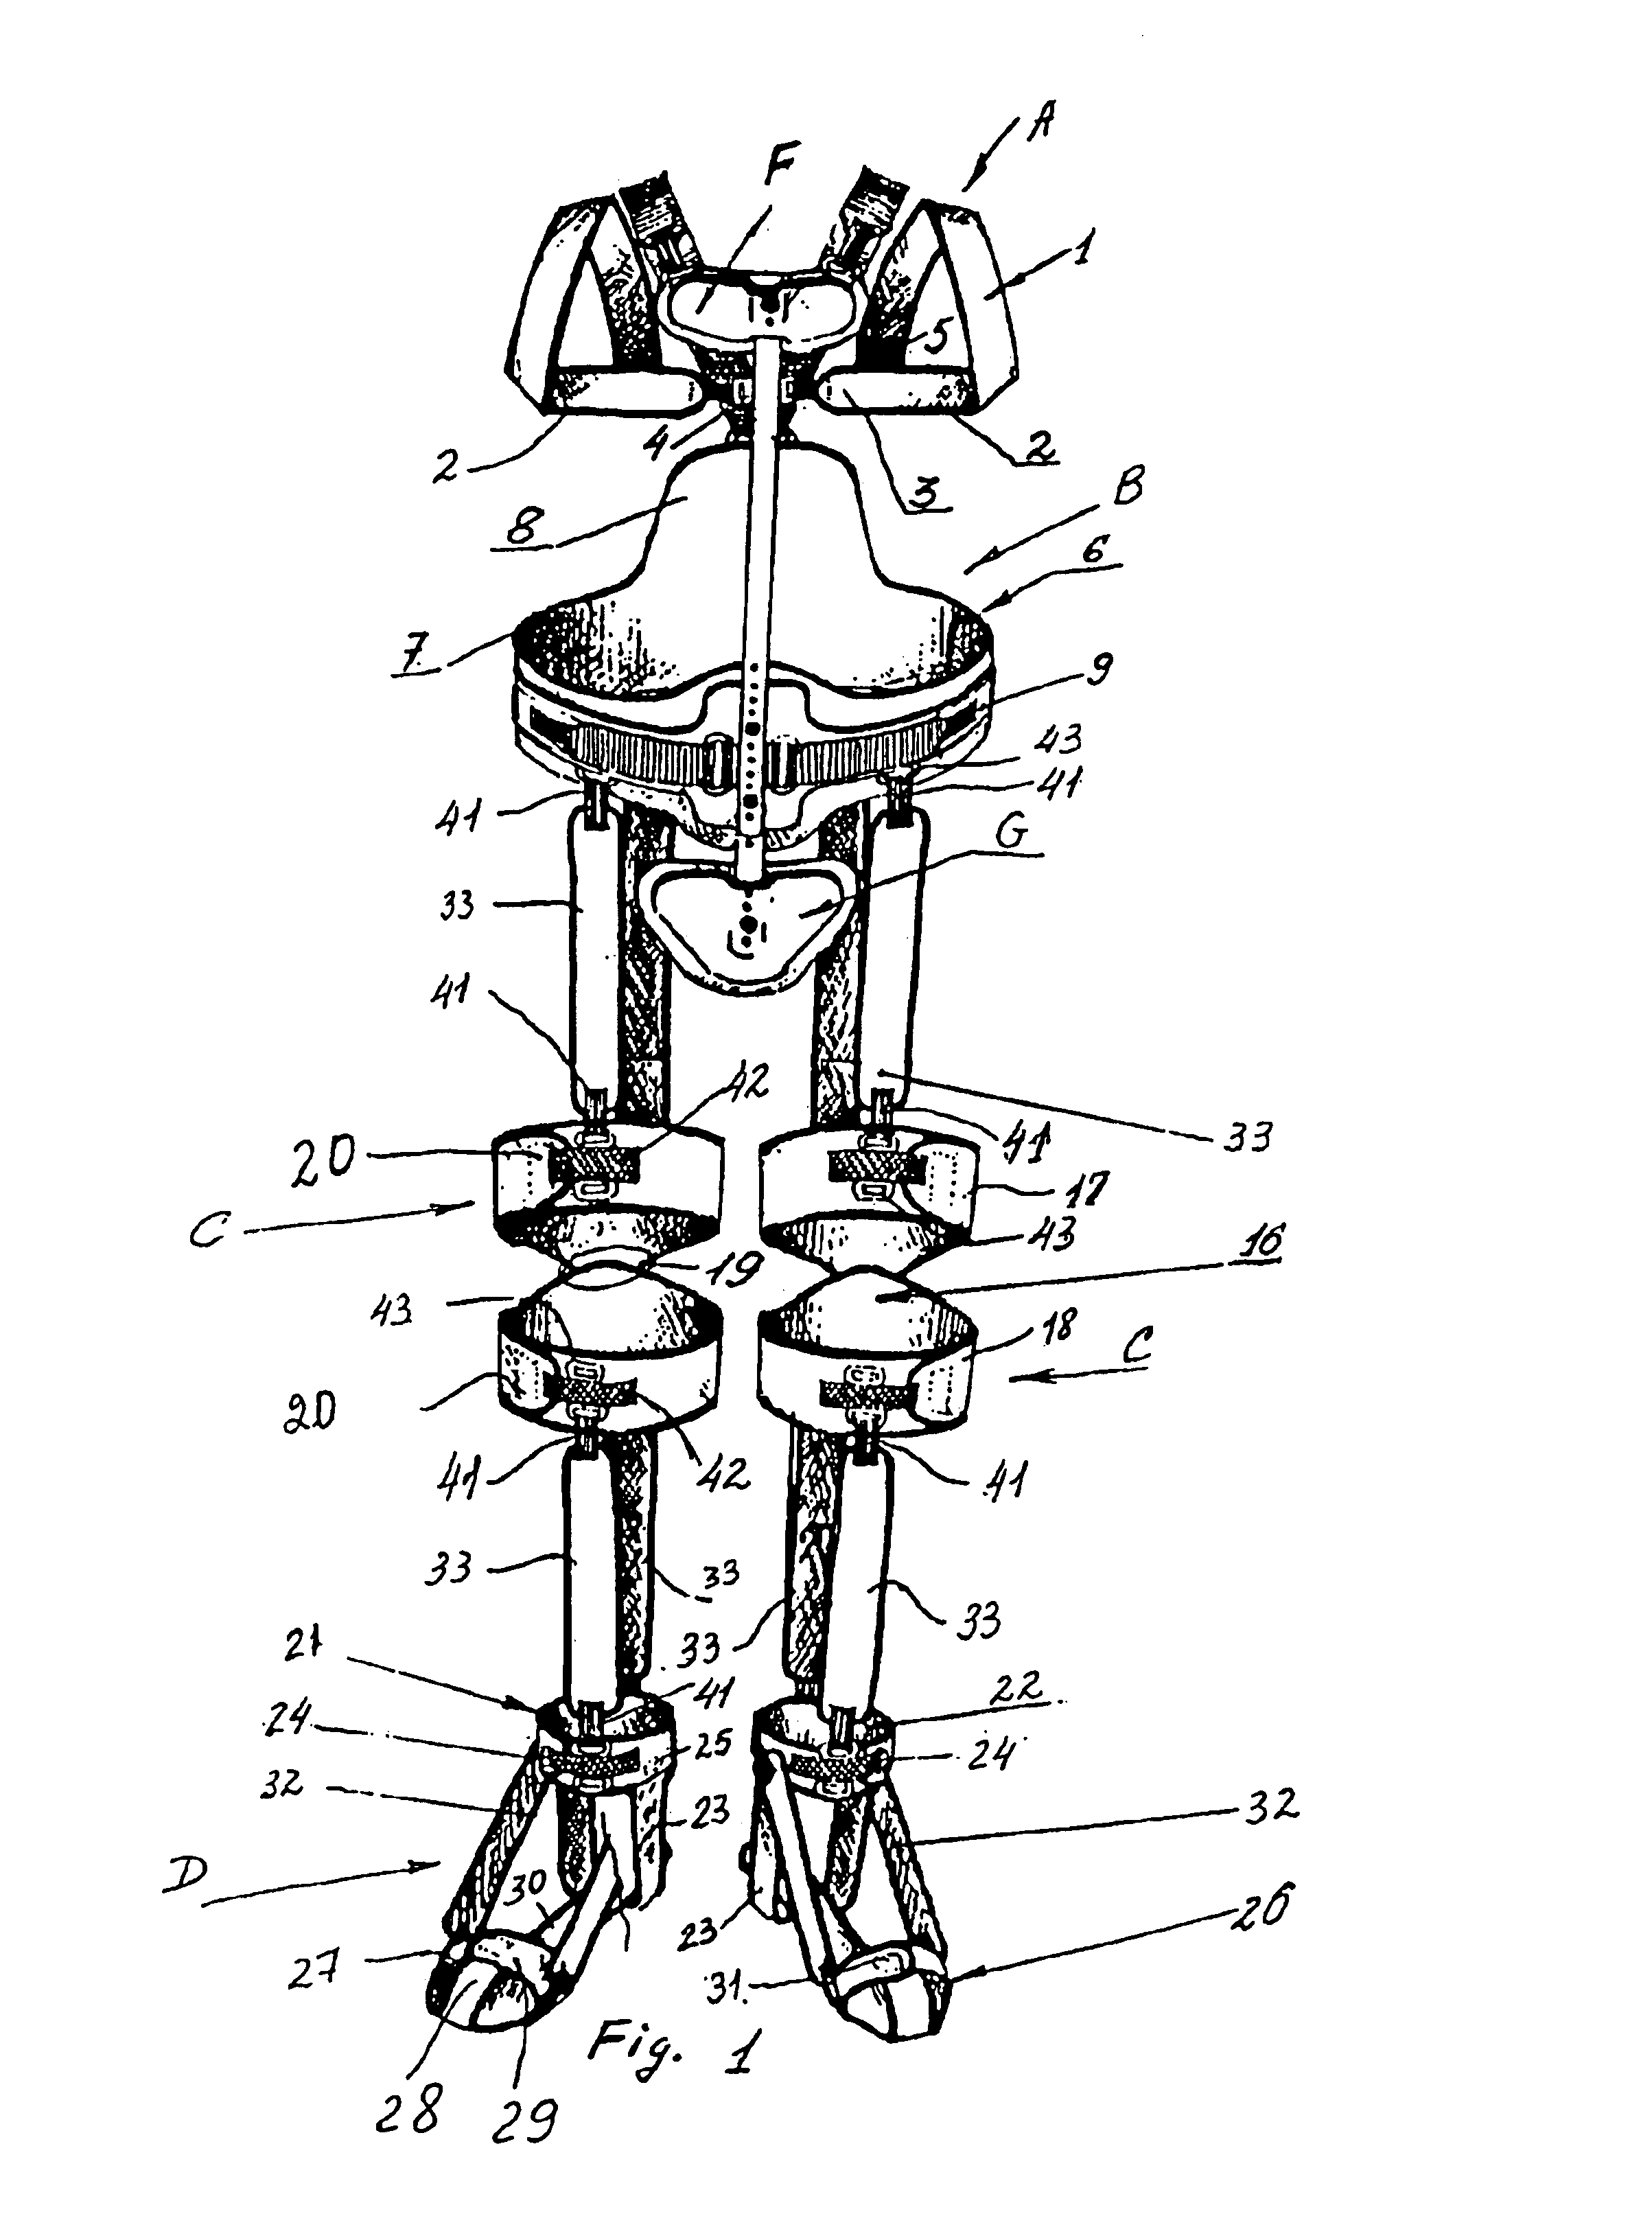 Device for users suffering from sequels of central nervous system and locomotrium affection of body